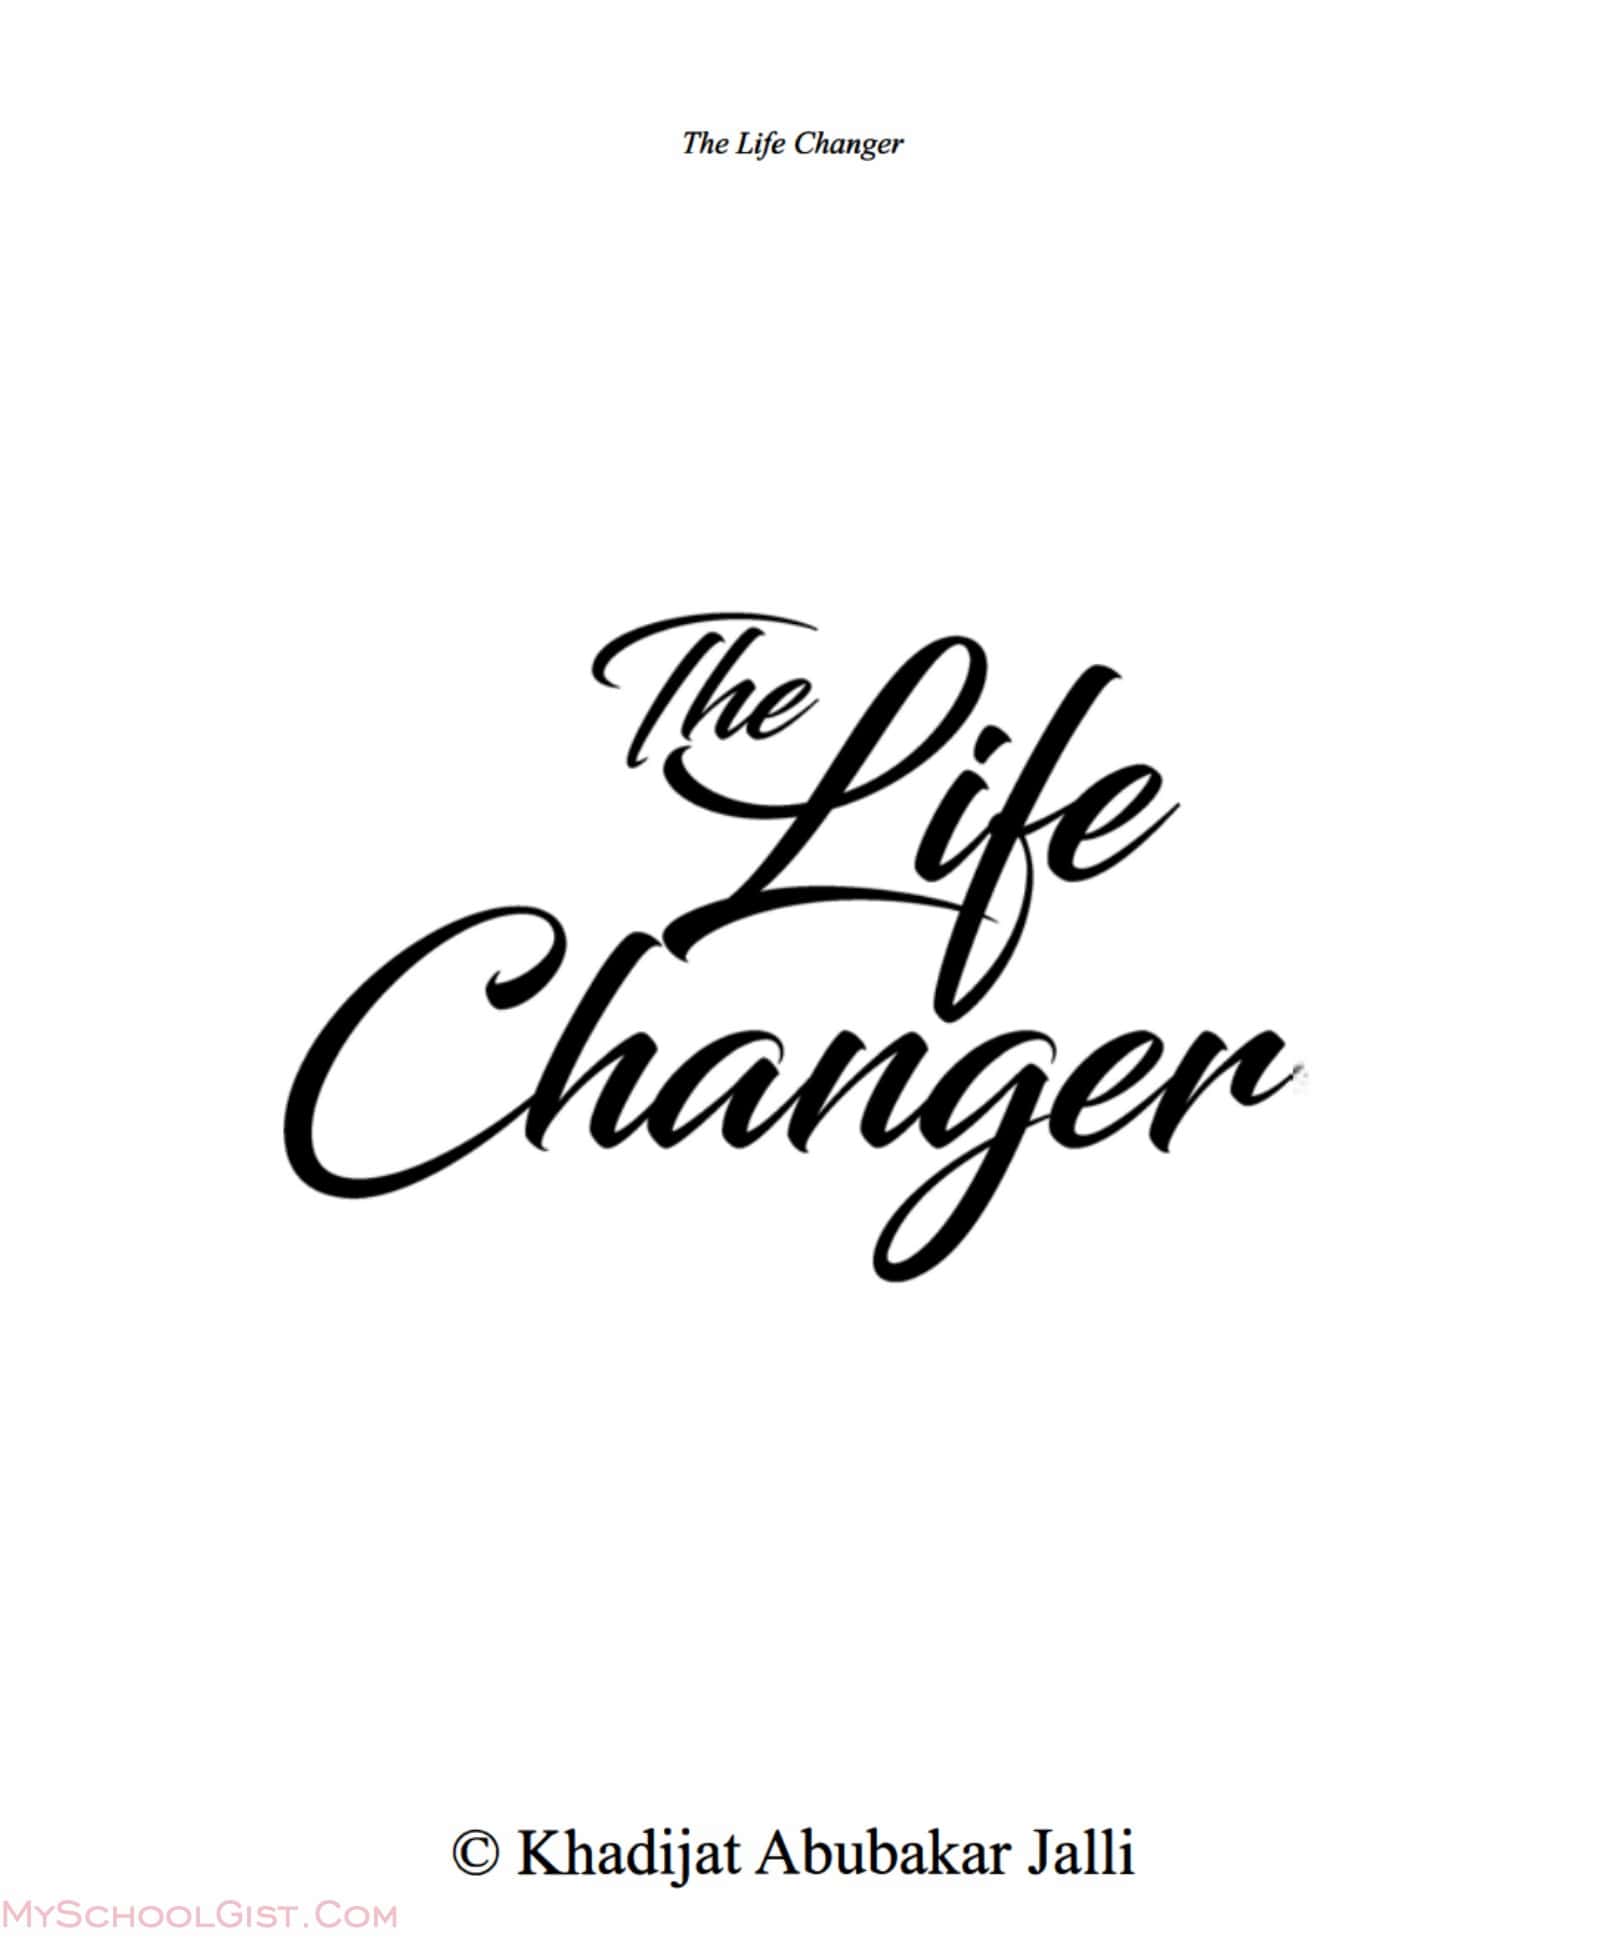 Download The Life Changer for Free